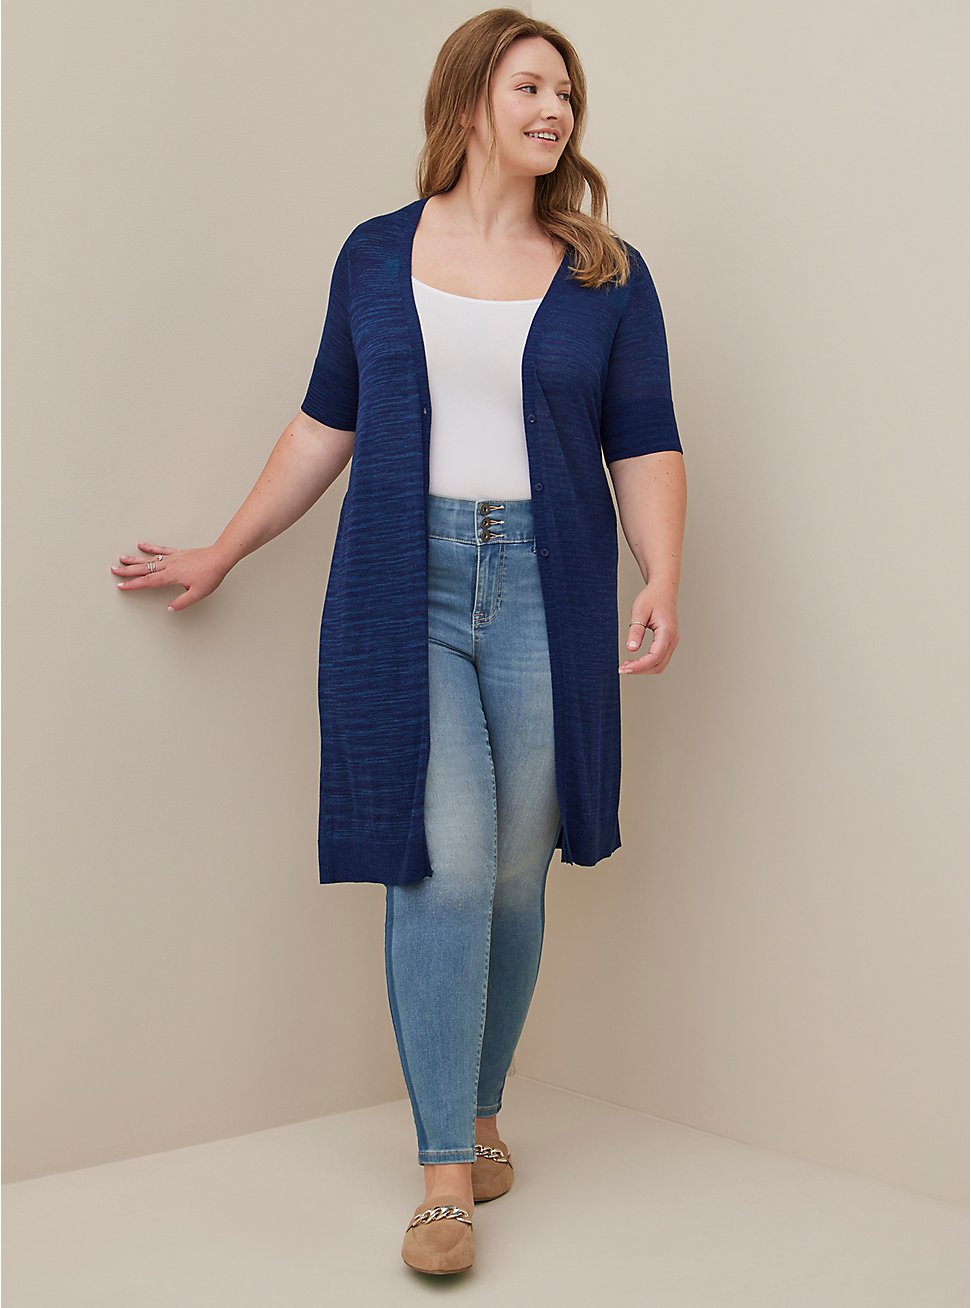 Plus Size Fitted Duster Cardigan - Neon Space Dye Blue , BLUE, hi-res